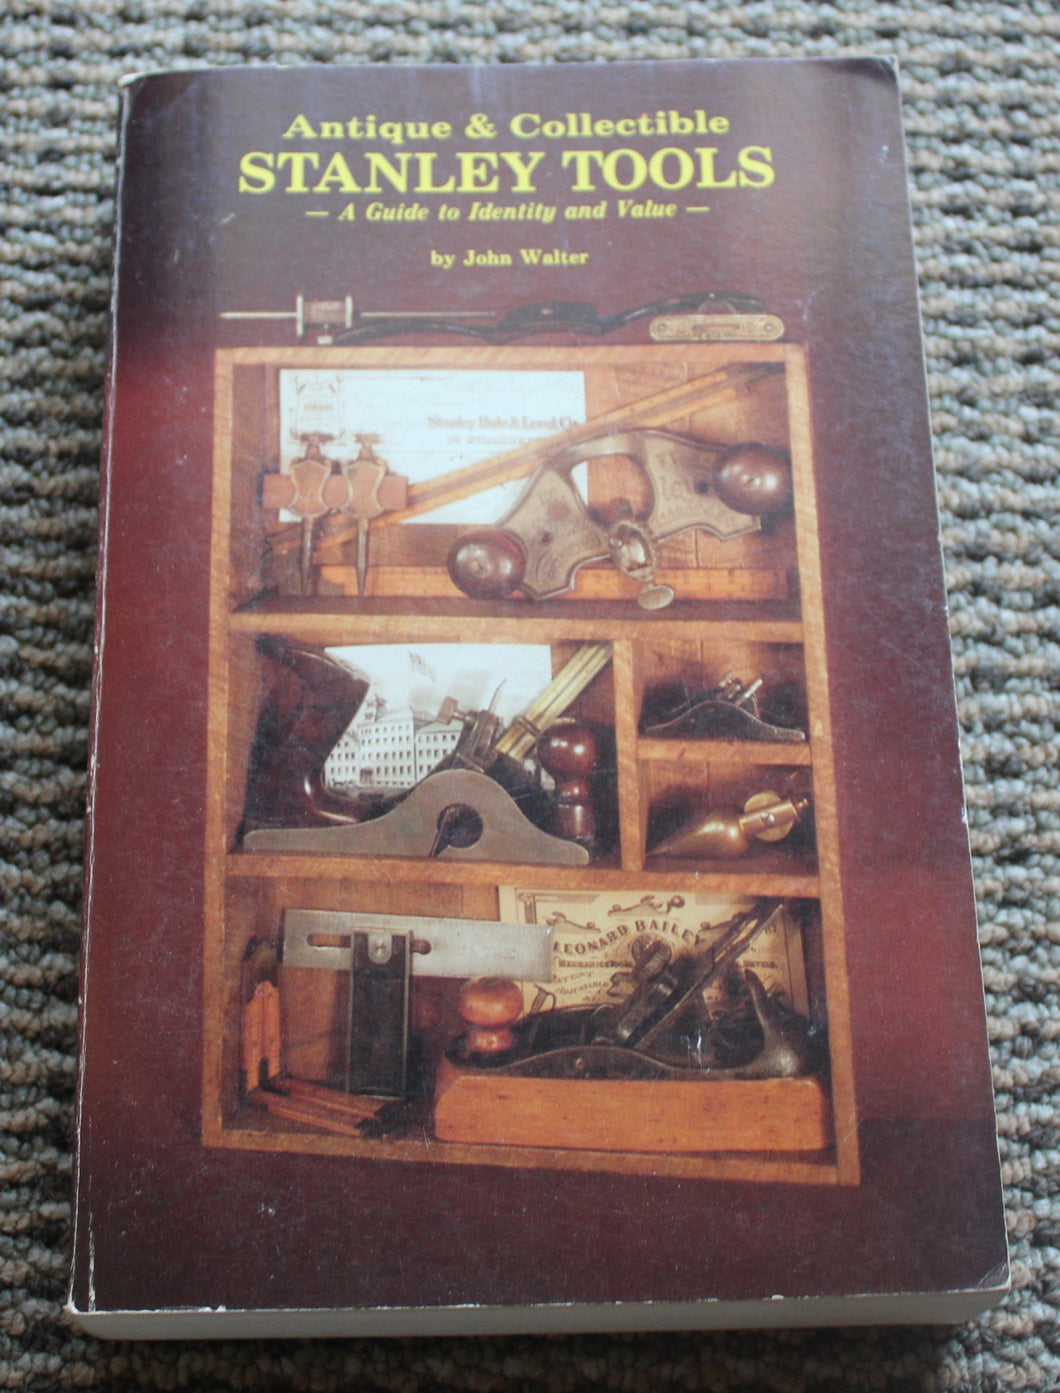 Antique & Collectible Stanley Tools by John Walter